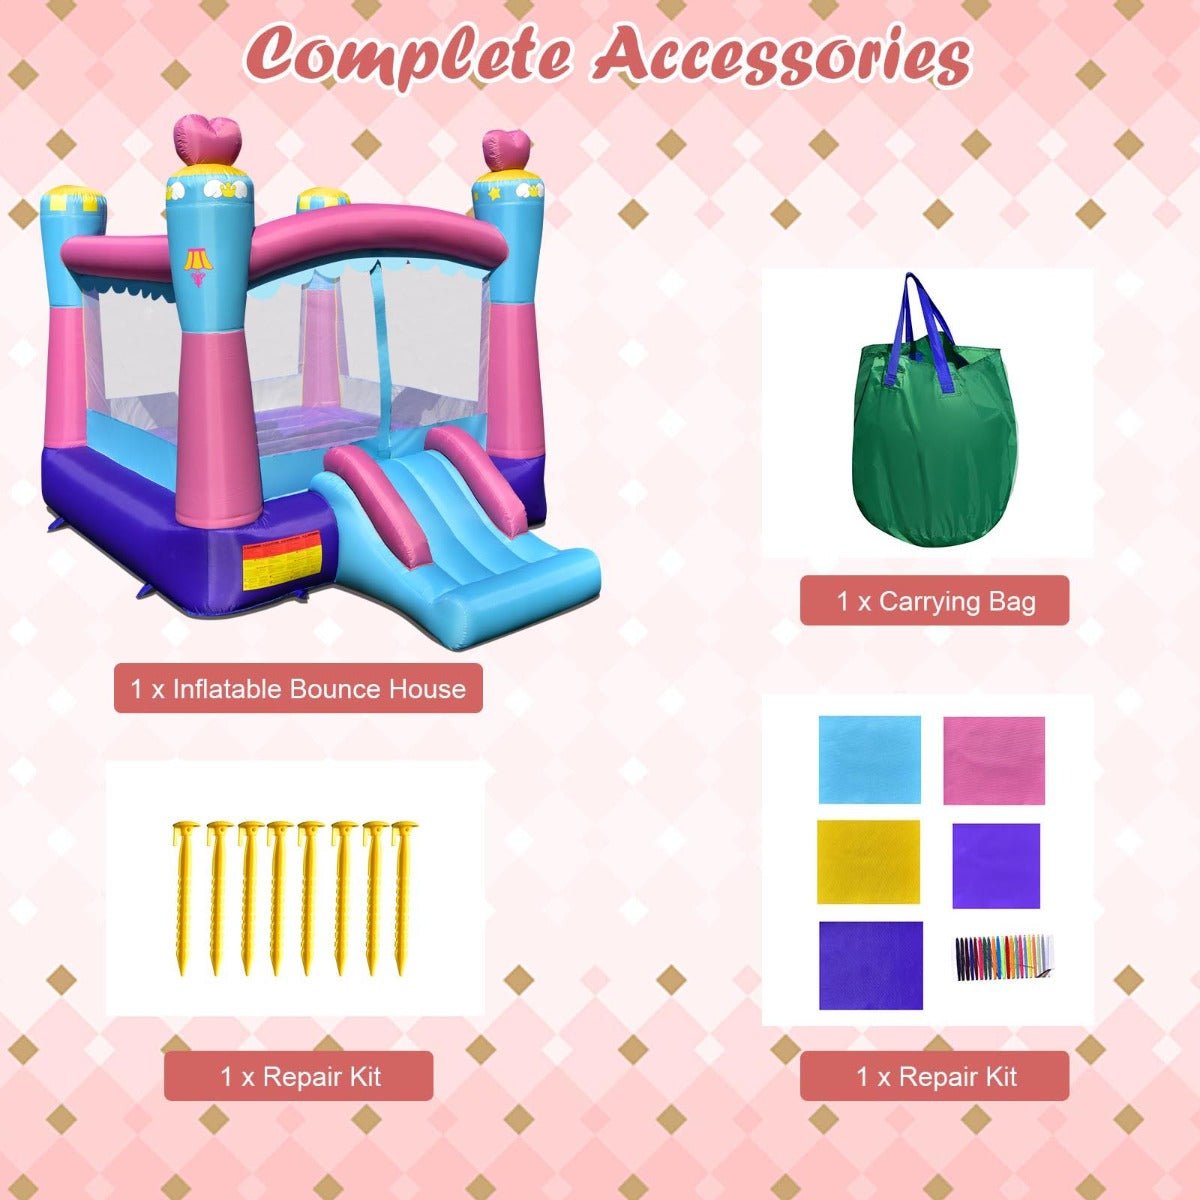 Princess Theme Jumping Castle - Active Play and Adventure for Kids